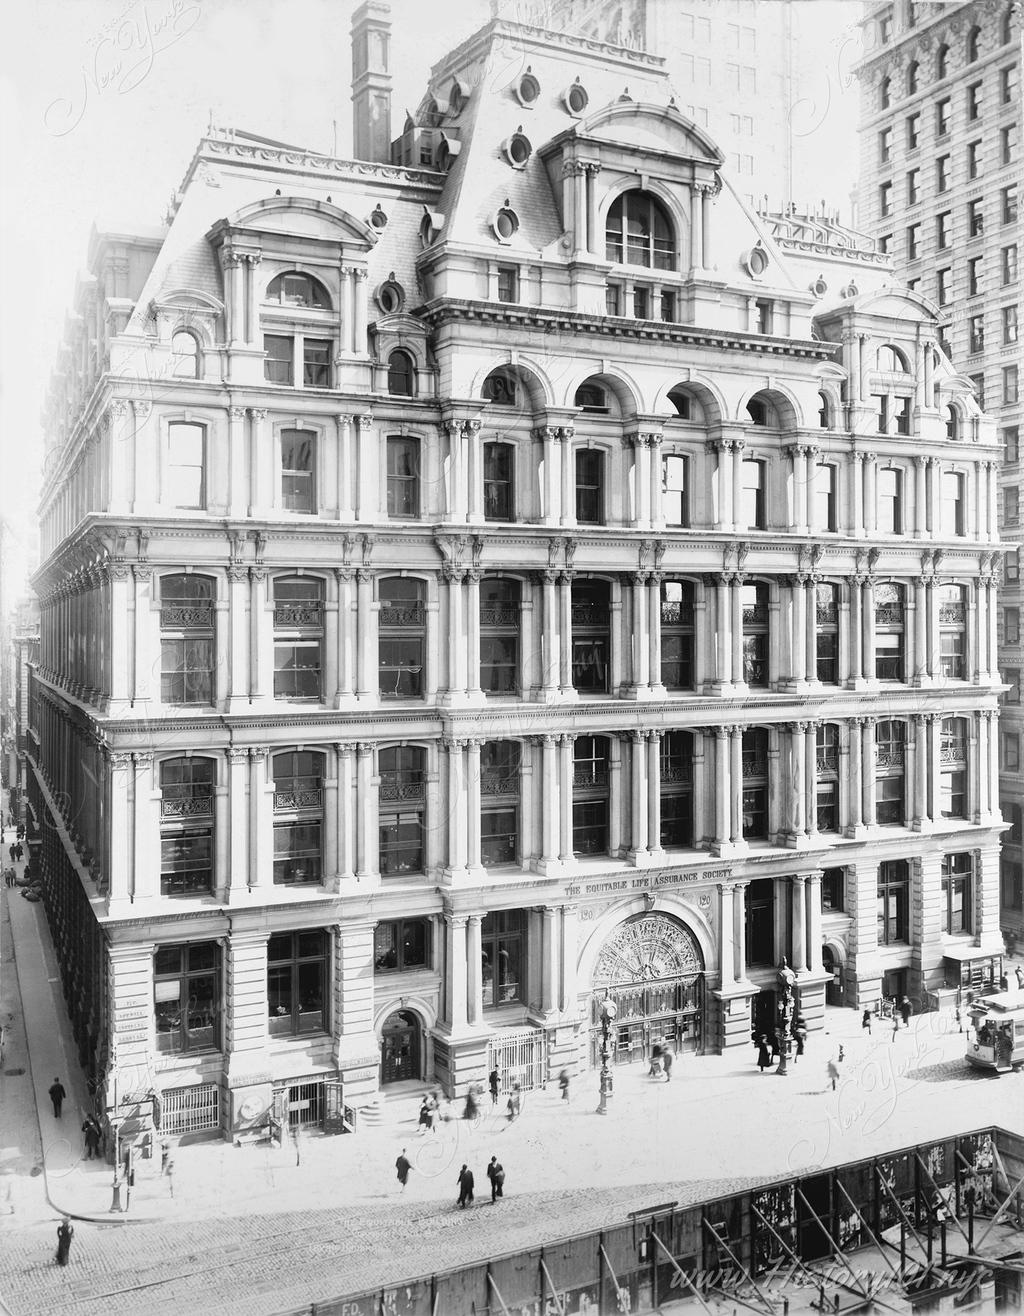 Uncover the pivotal role of NYC's Equitable Building, from its 1870 elevator innovation to driving the 1916 Zoning Resolution